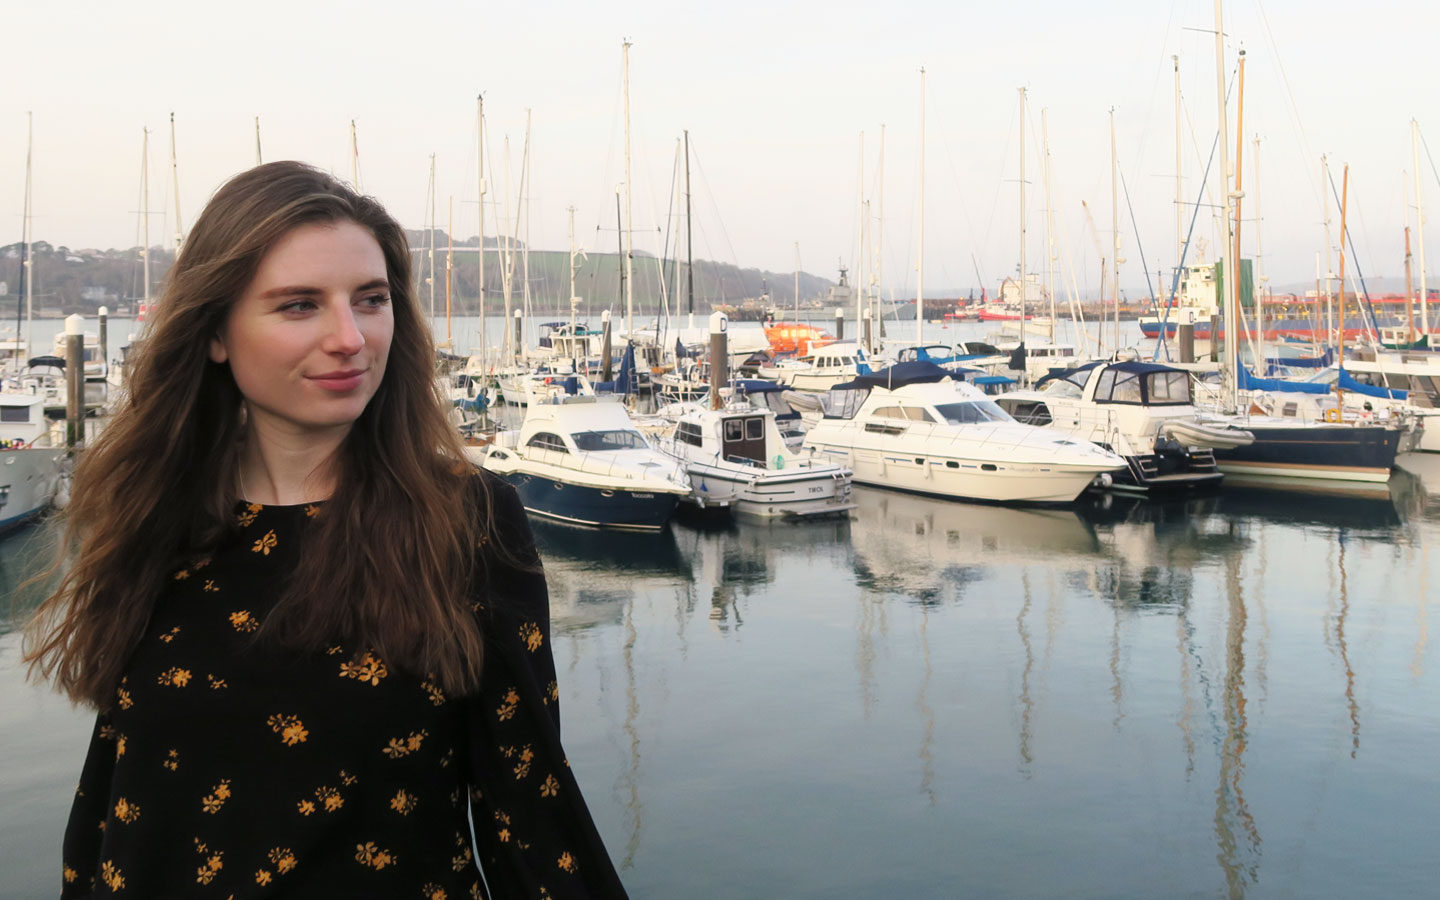 melissa carne standing in front of boats in falmouth harbour